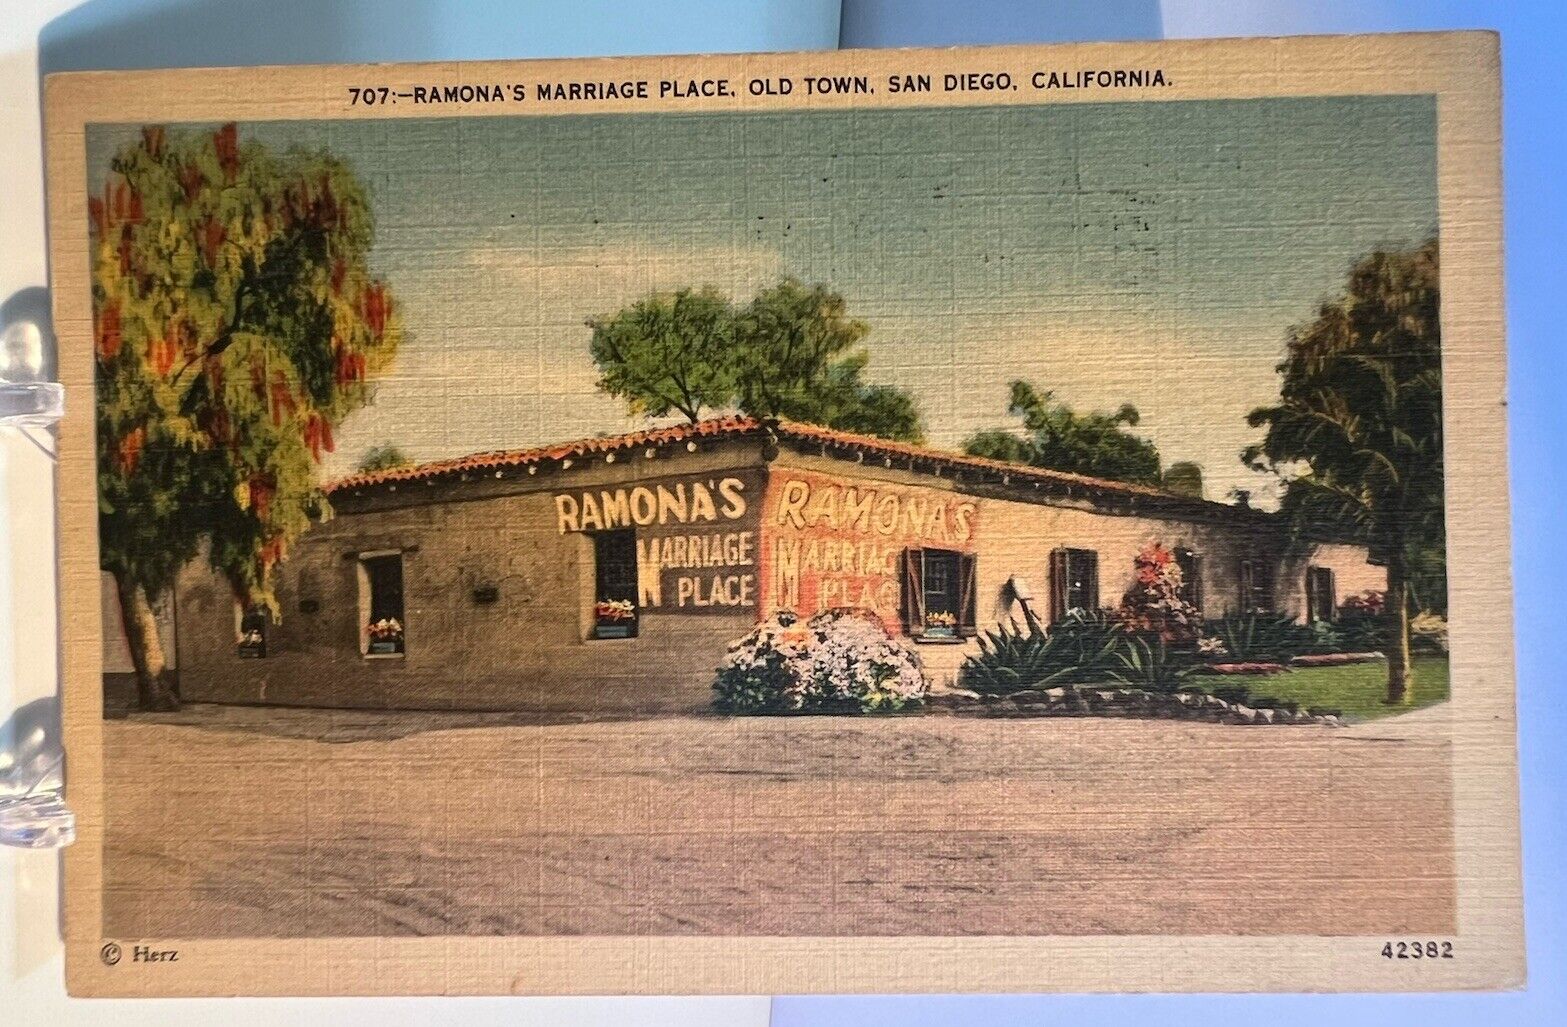 Ramona's Marriage Place Old Town San Diego California CA Postcard PC 1930s